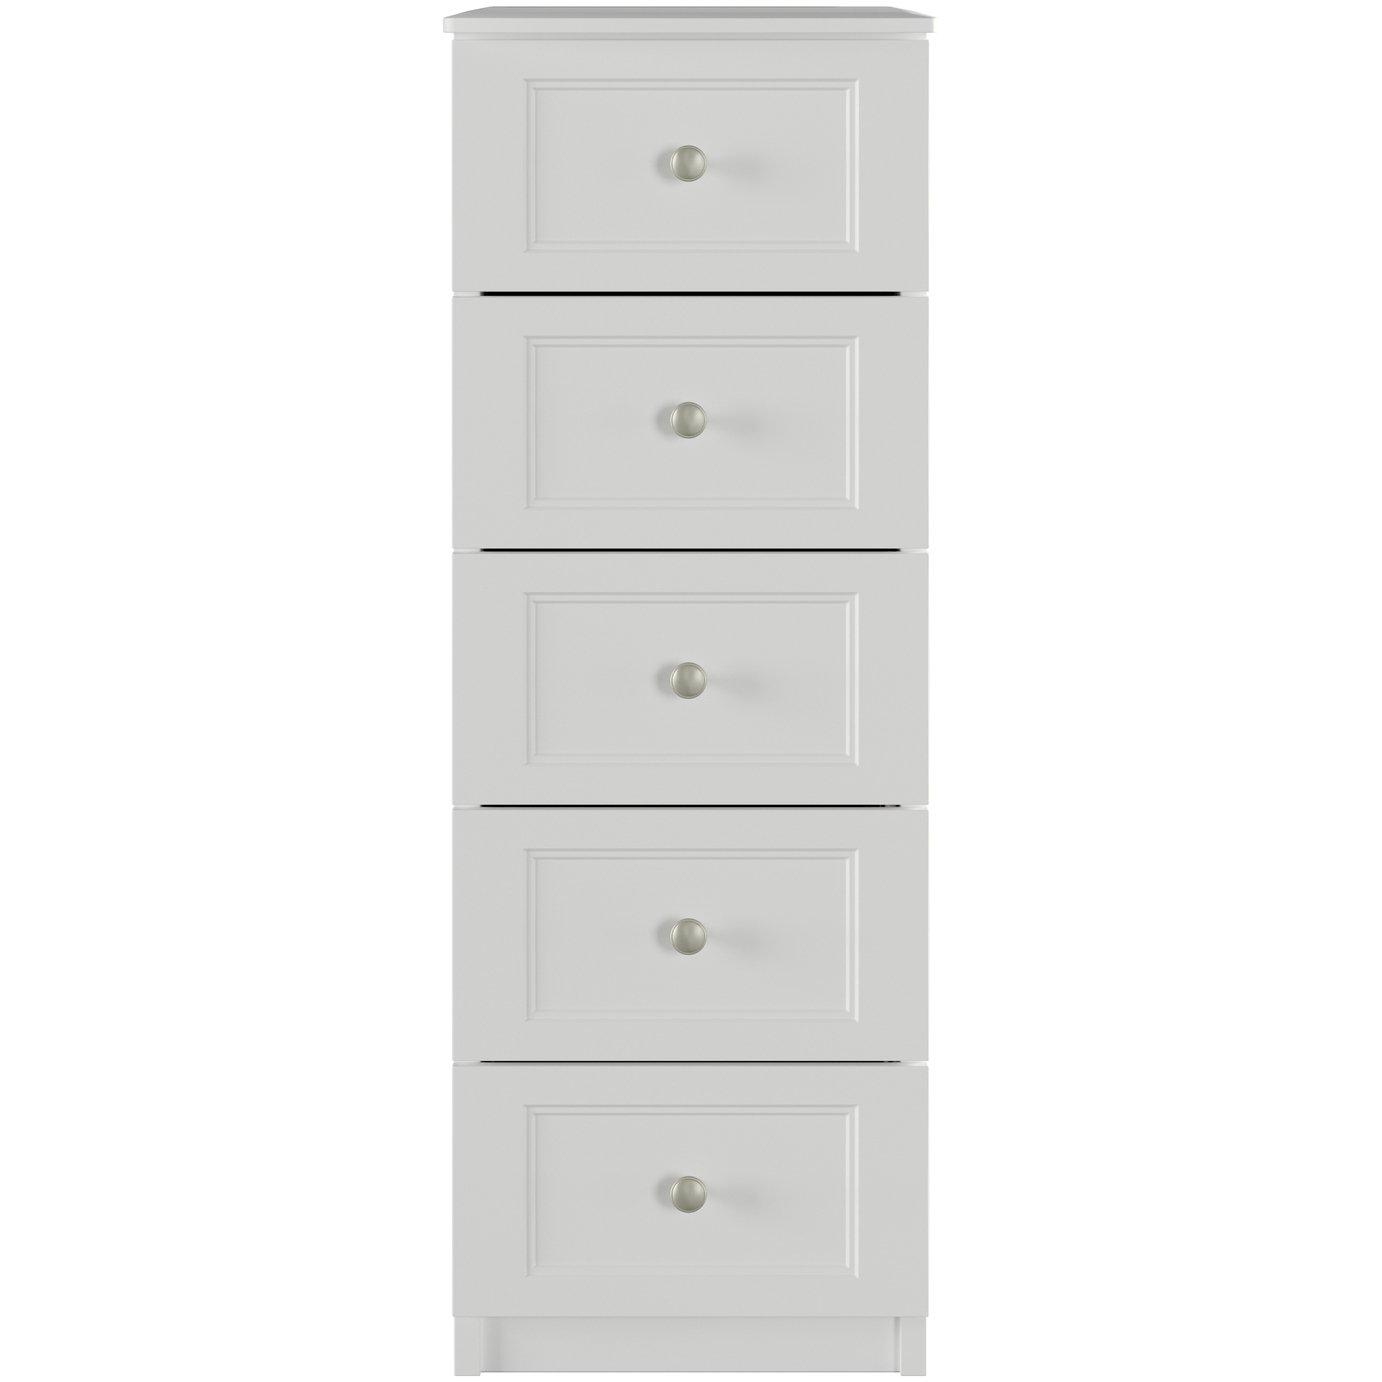 One Call Bexley Tallboy - White